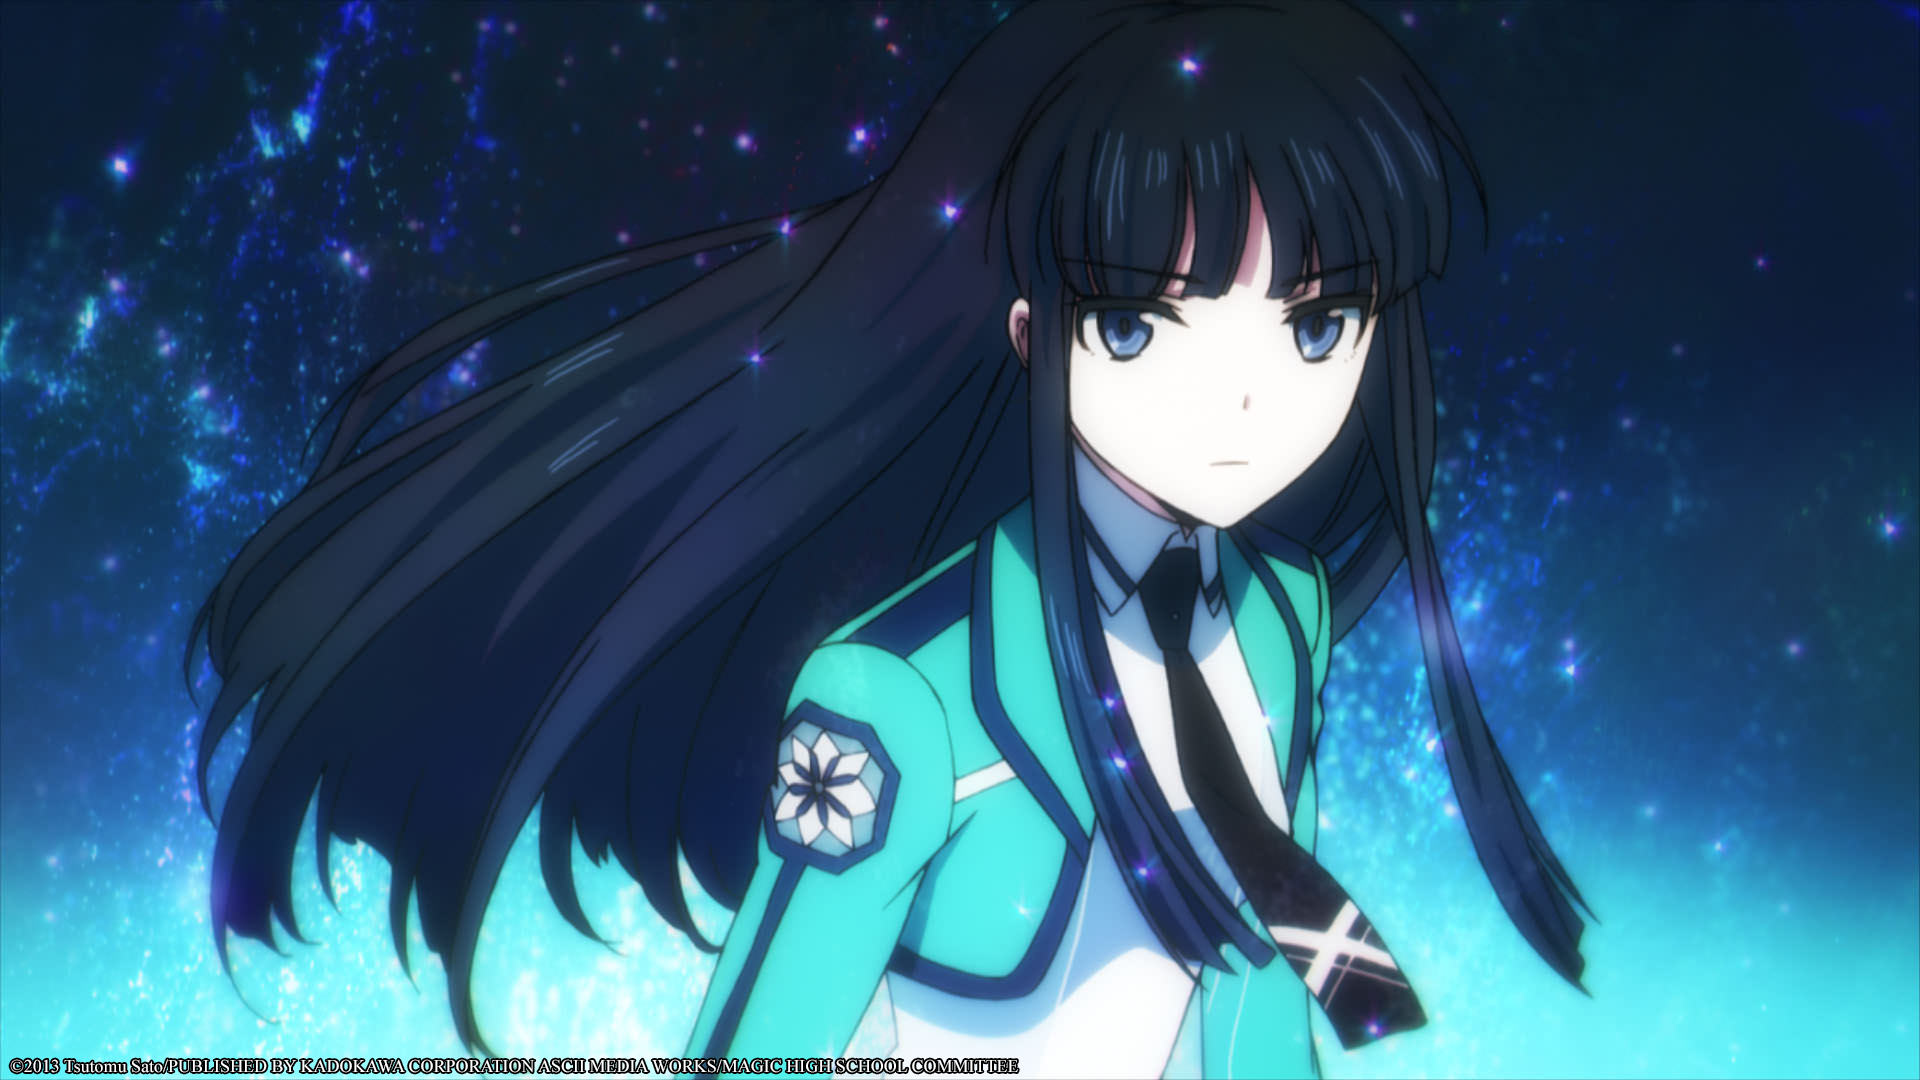 Amazing The Irregular At Magic High School Pictures & Backgrounds